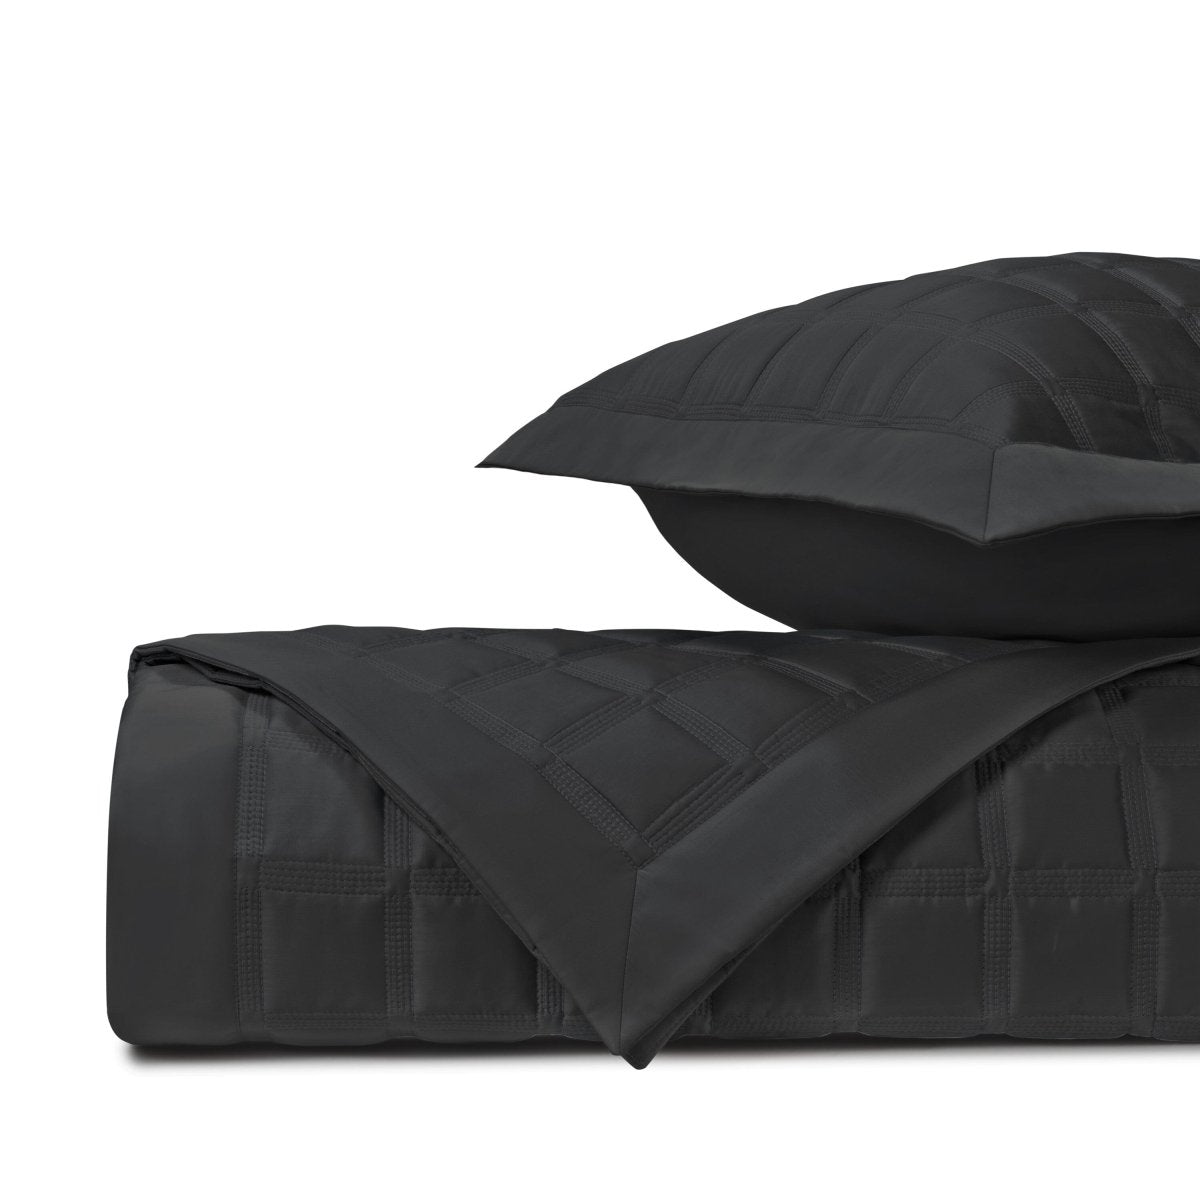 ATHENS Quilted Coverlet in Black by Home Treasures at Fig Linens and Home